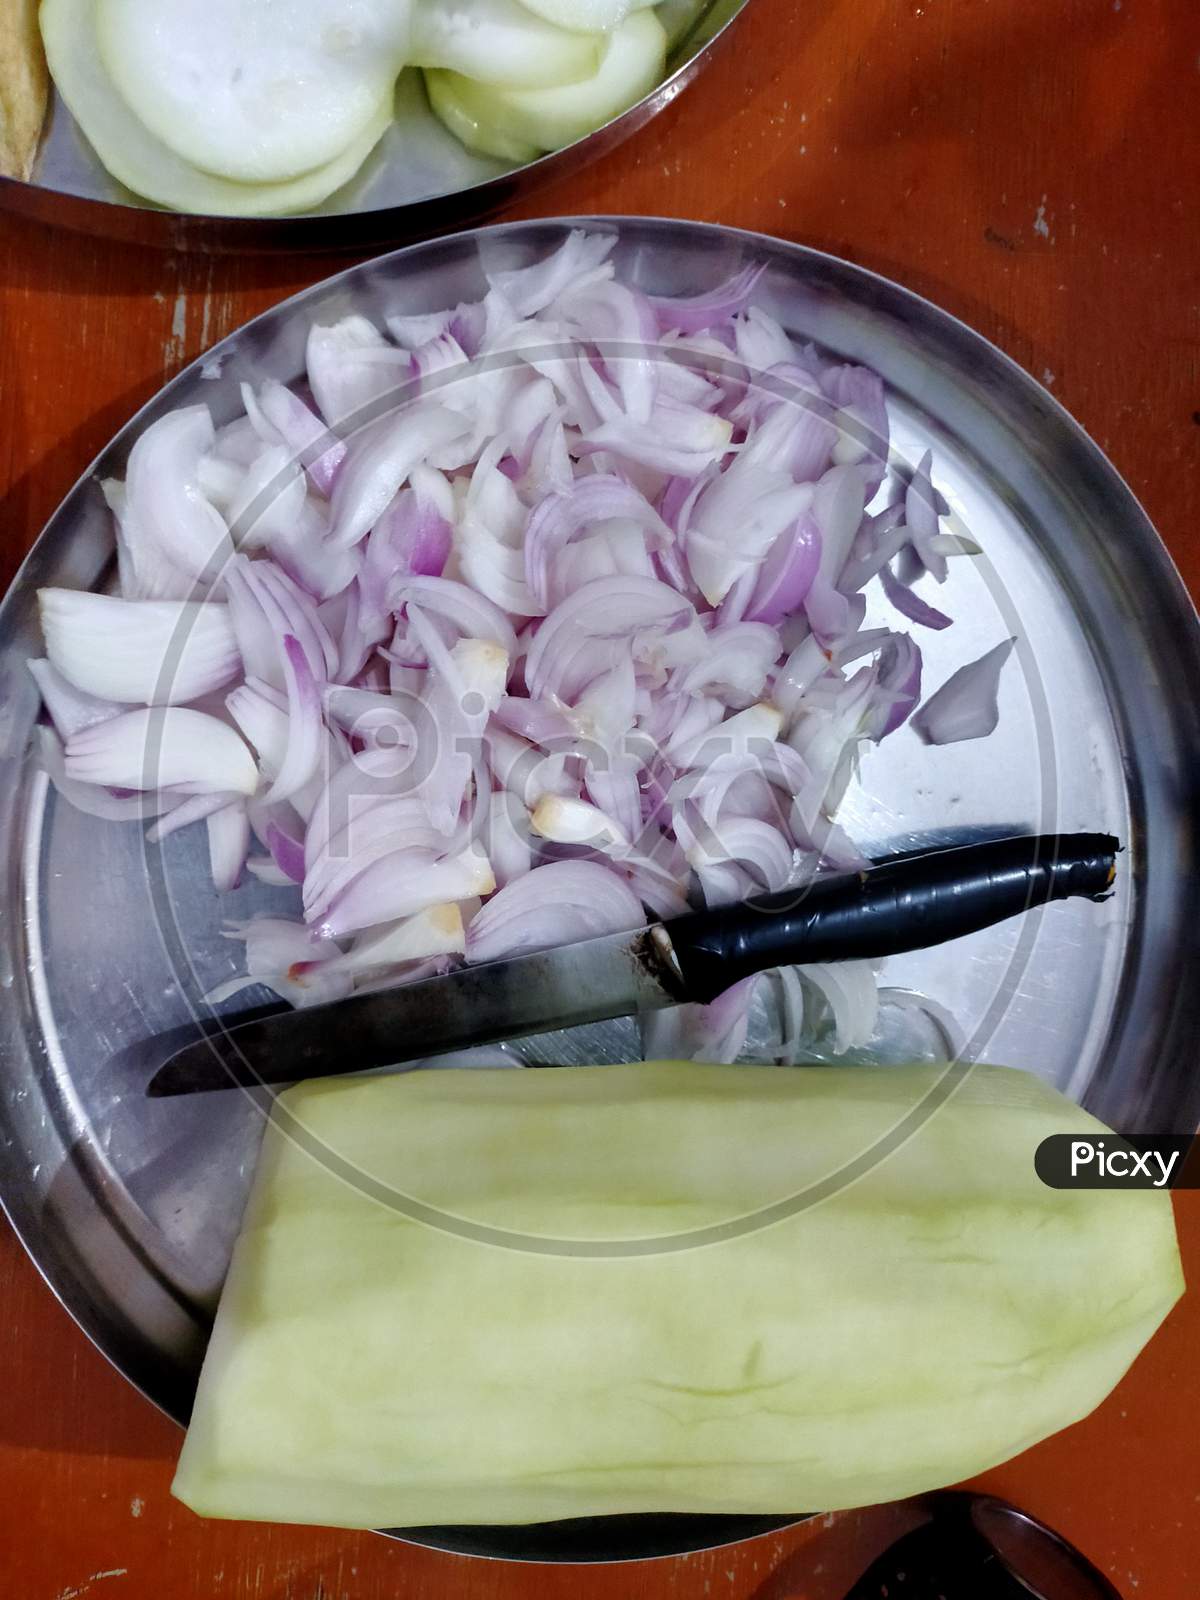 Cutting vegetable to cook food.